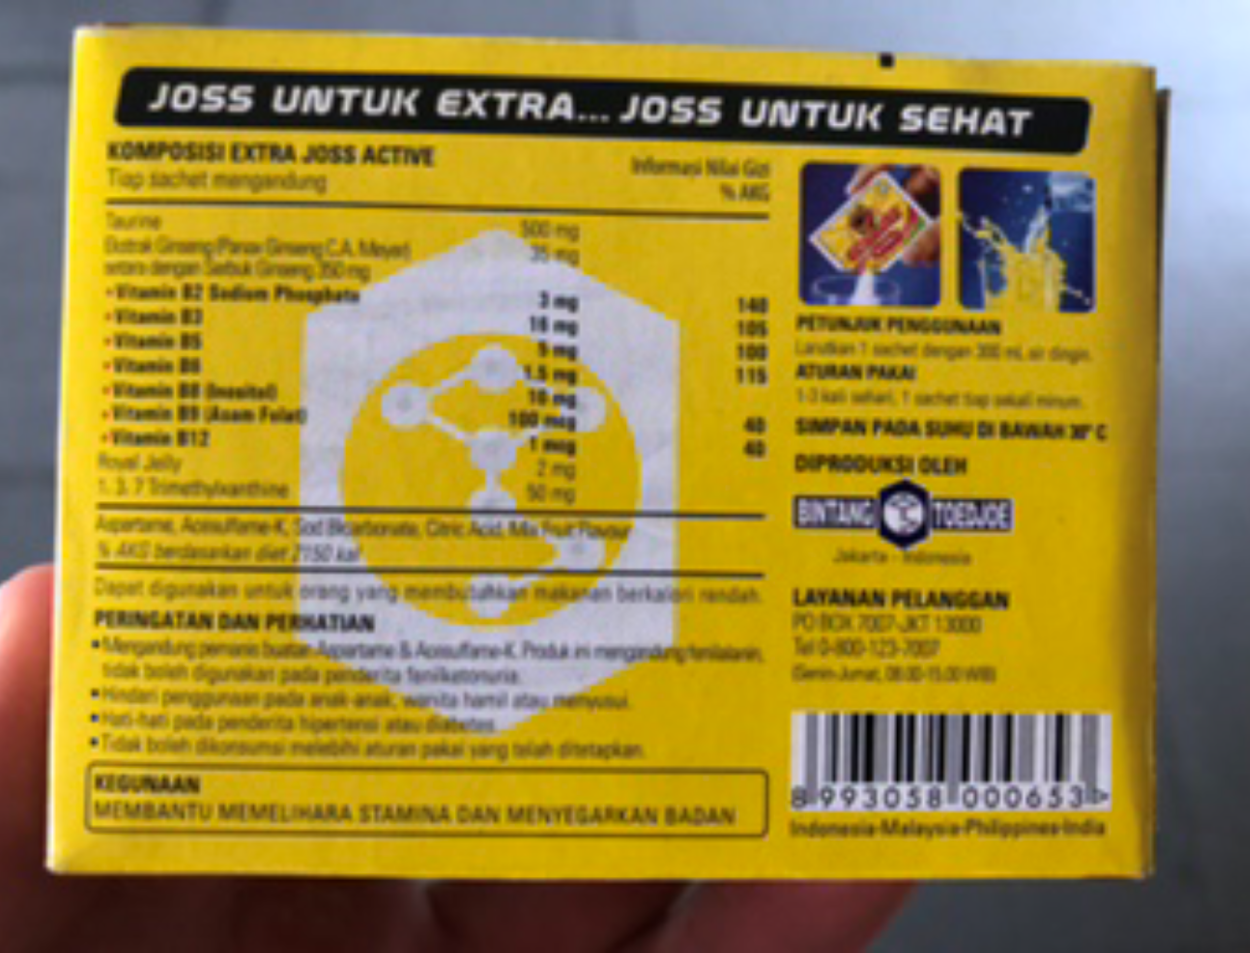 Ingredients info on the pack of Extra Joss